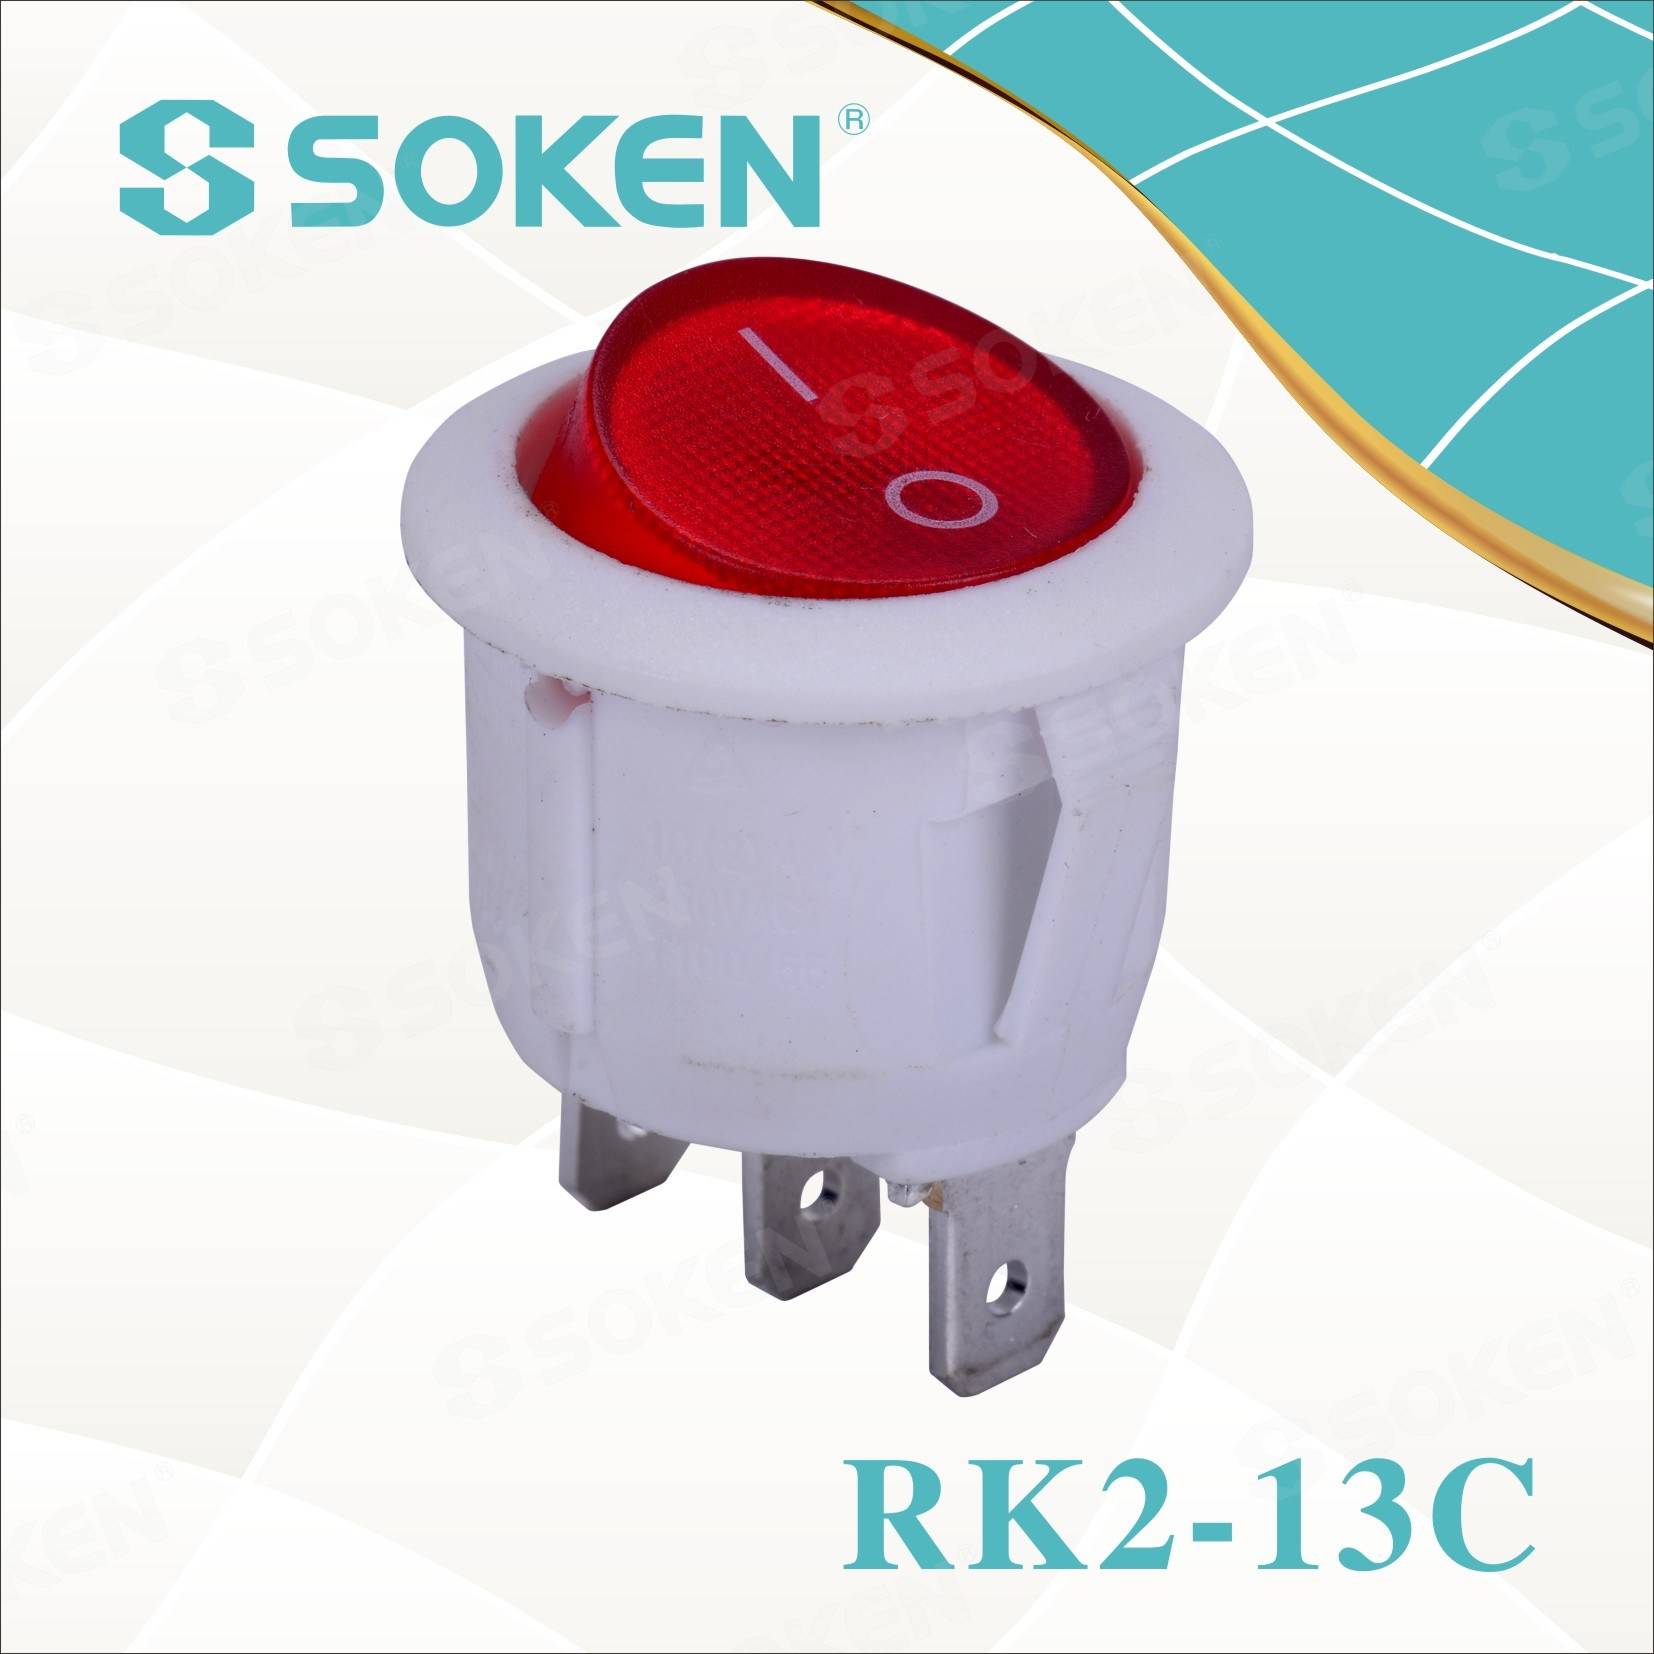 Super Purchasing for Tempered Glass Switch Frame -
 Soken Rk2-13c Round on off Rocker Switch – Master Soken Electrical